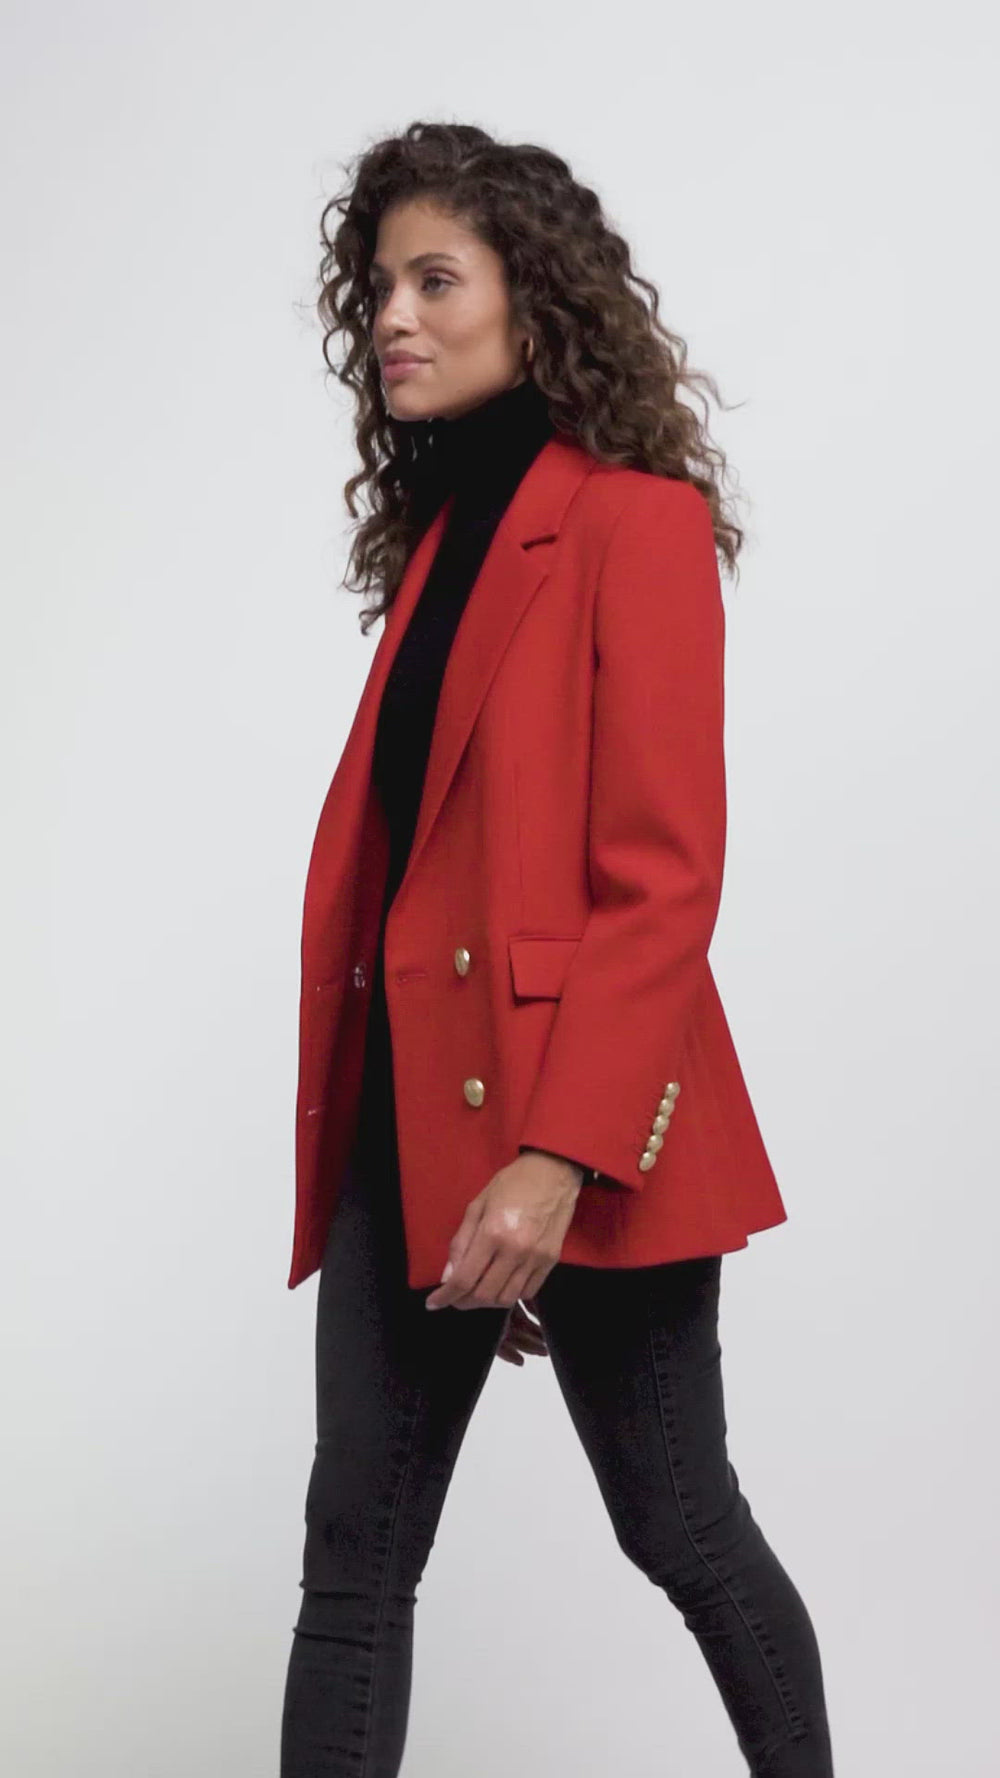 double breasted wool blazer in red barathea with two hip pockets and gold button details down front and on cuffs and handmade in the uk